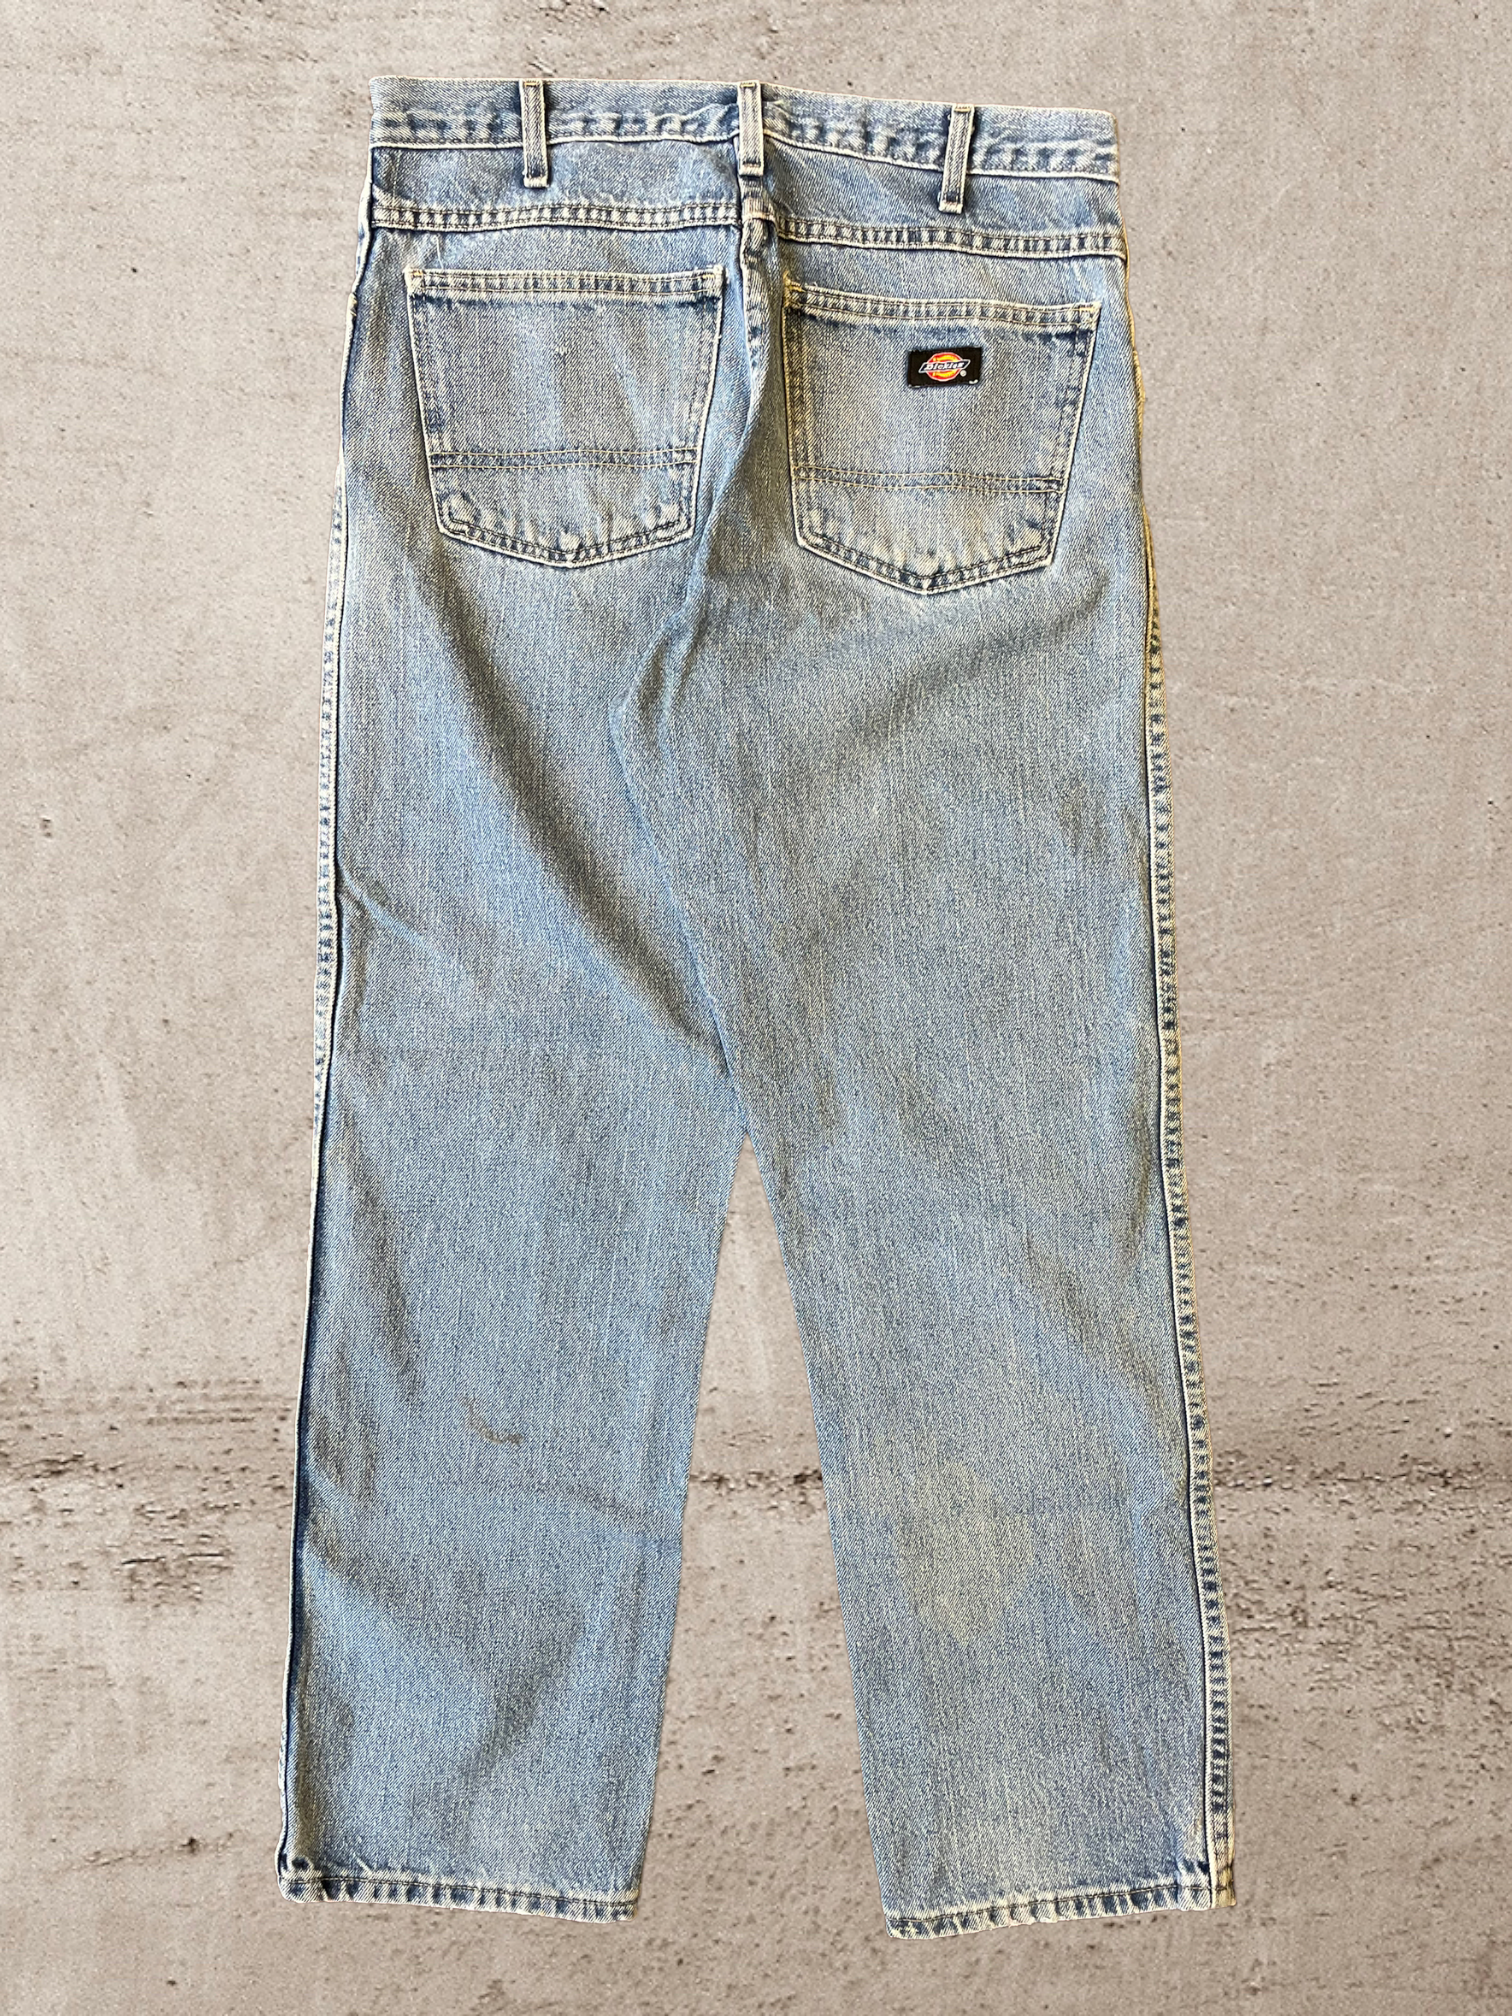 90s Dickies Distressed Light Wash Jeans -32x30